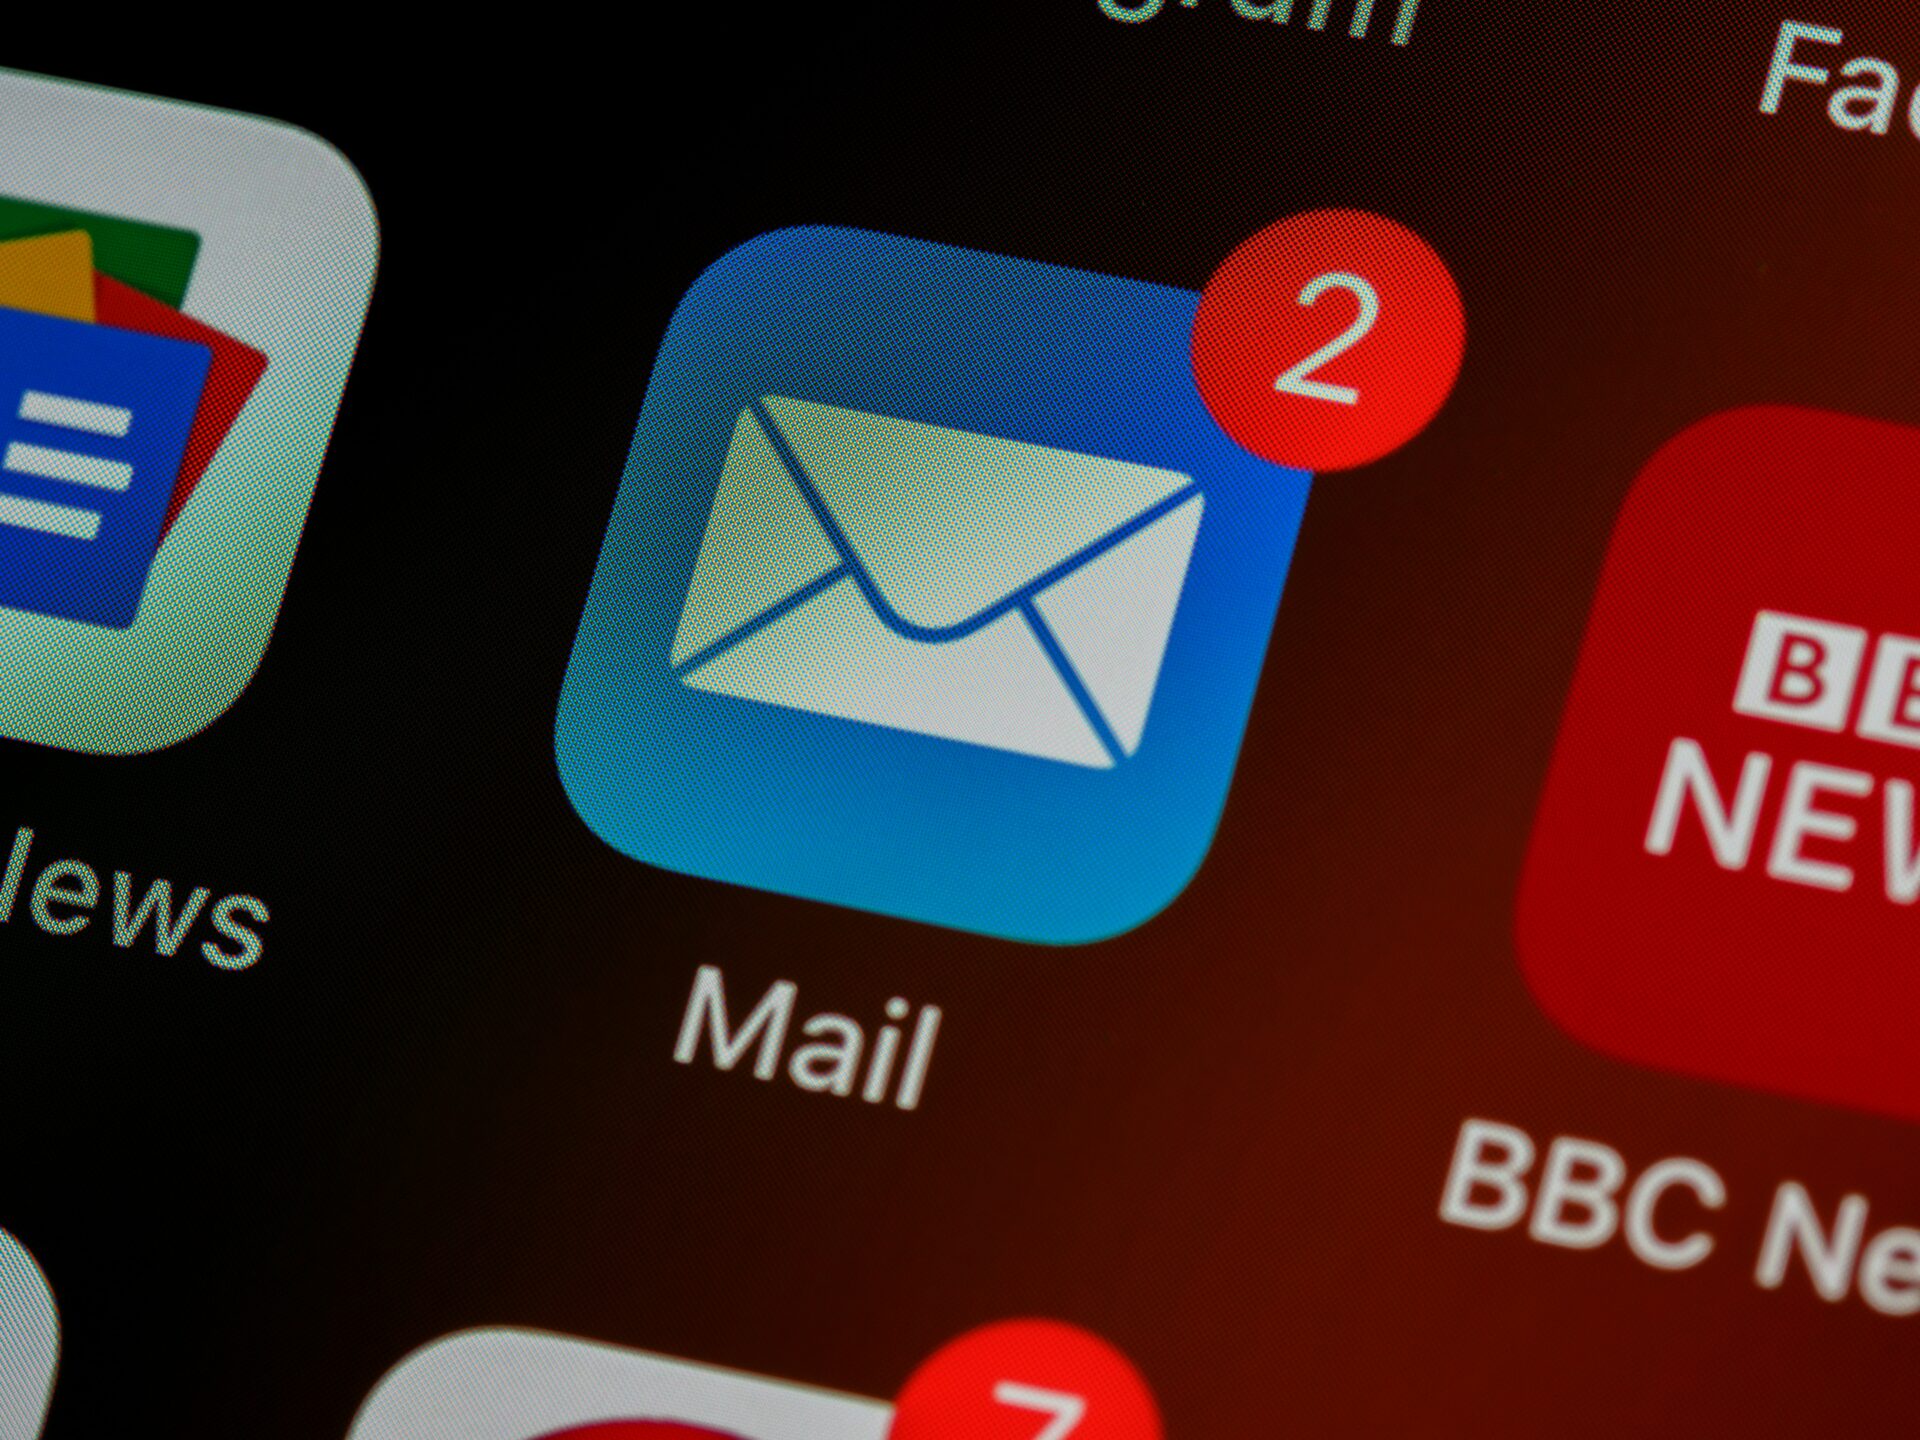 How to Use iCloud Email on Android - Tech Advisor